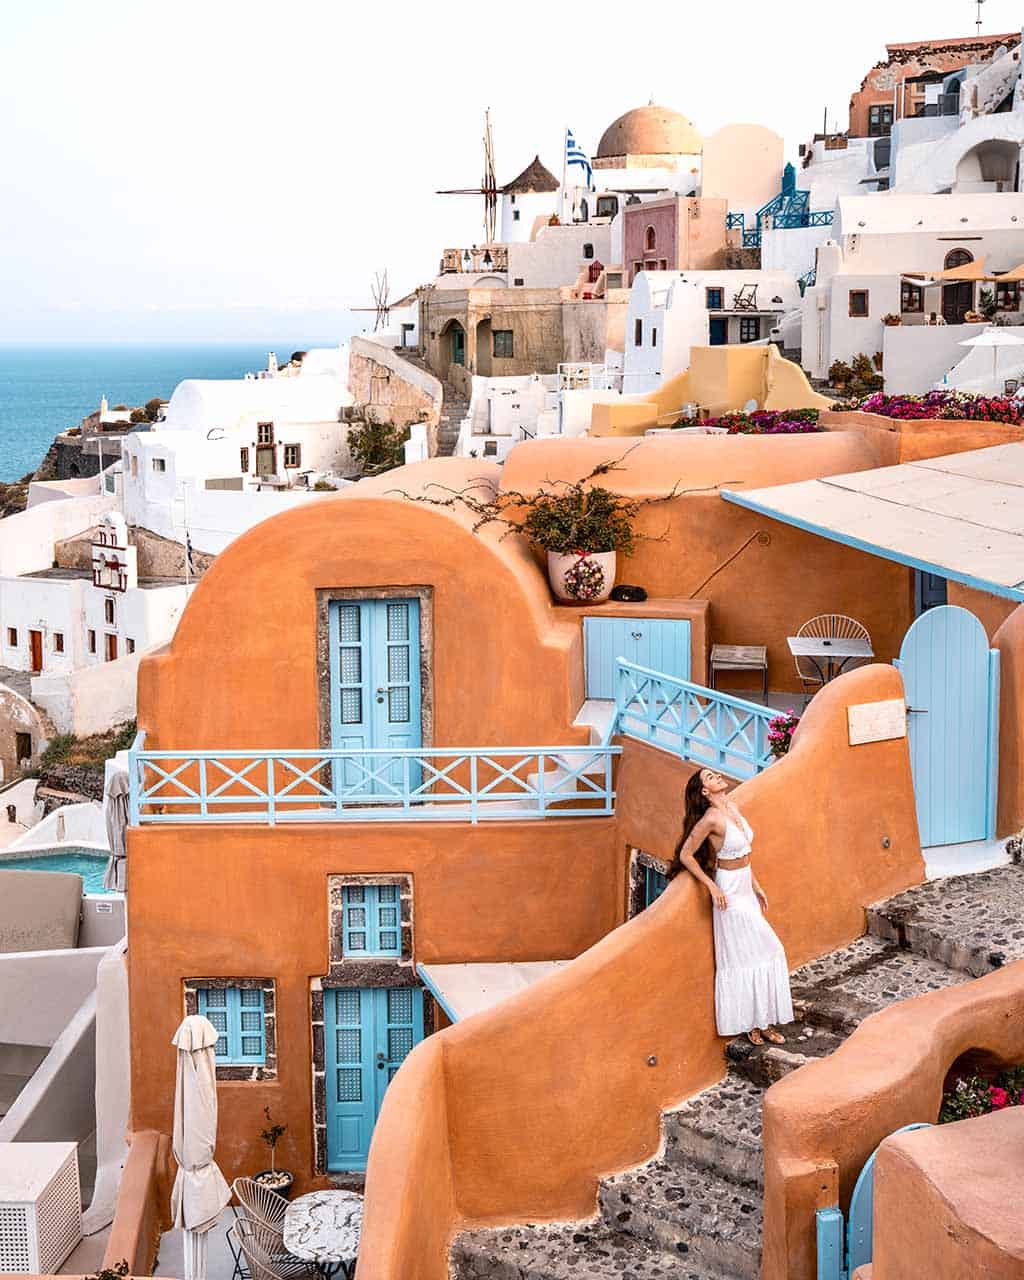 The iconic orange Kastro Oia Houses in Oia, Santorini, built on a hill.